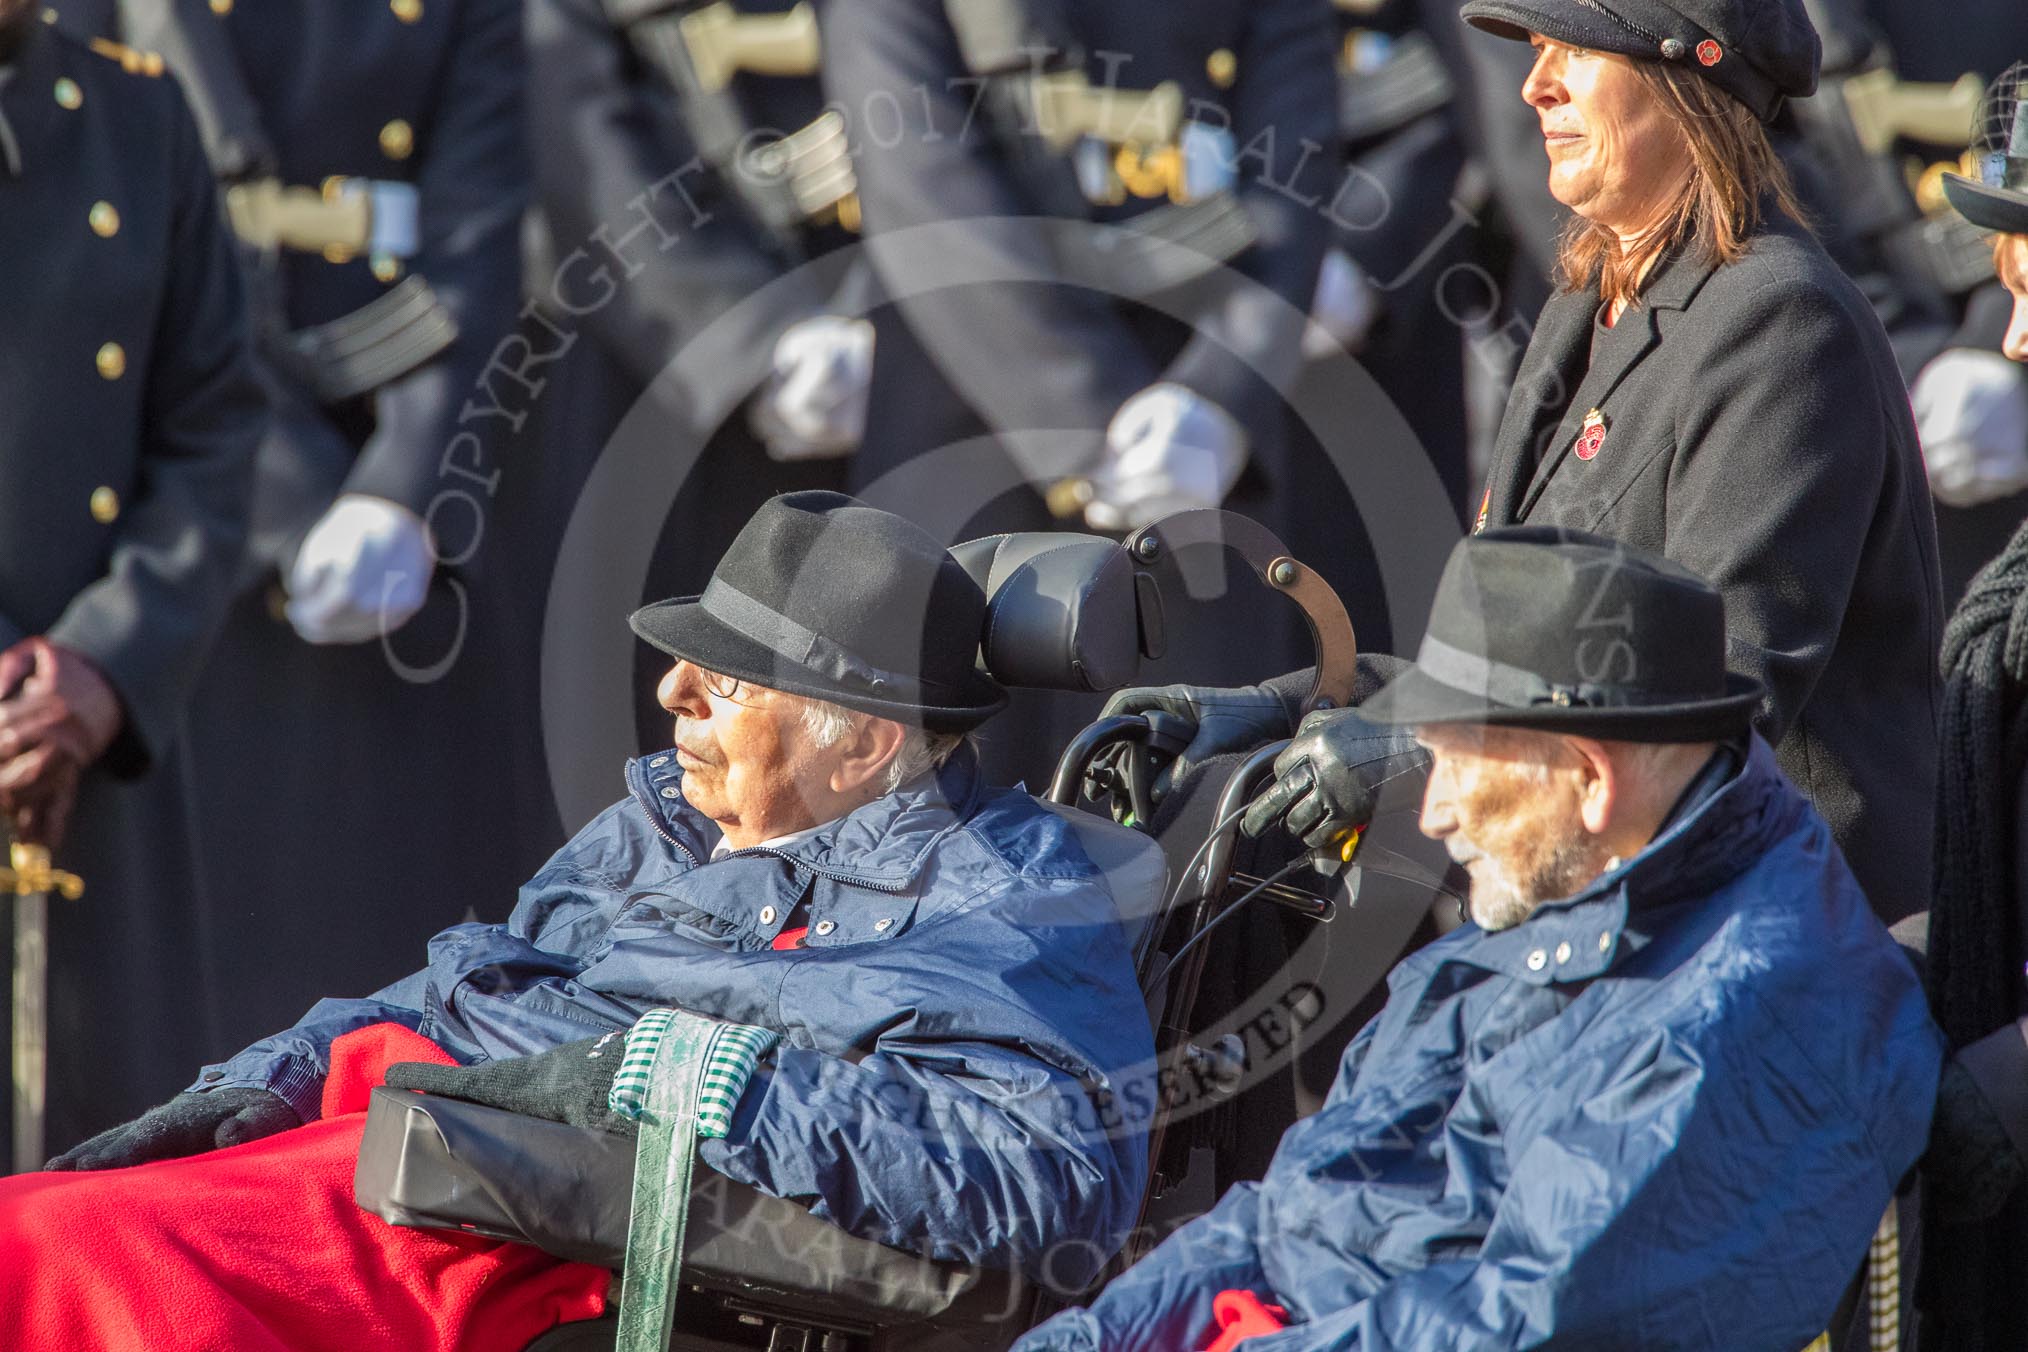 The Queen Alexandra Hospital Home (Group AA4, 20 members) during the Royal British Legion March Past on Remembrance Sunday at the Cenotaph, Whitehall, Westminster, London, 11 November 2018, 11:49.